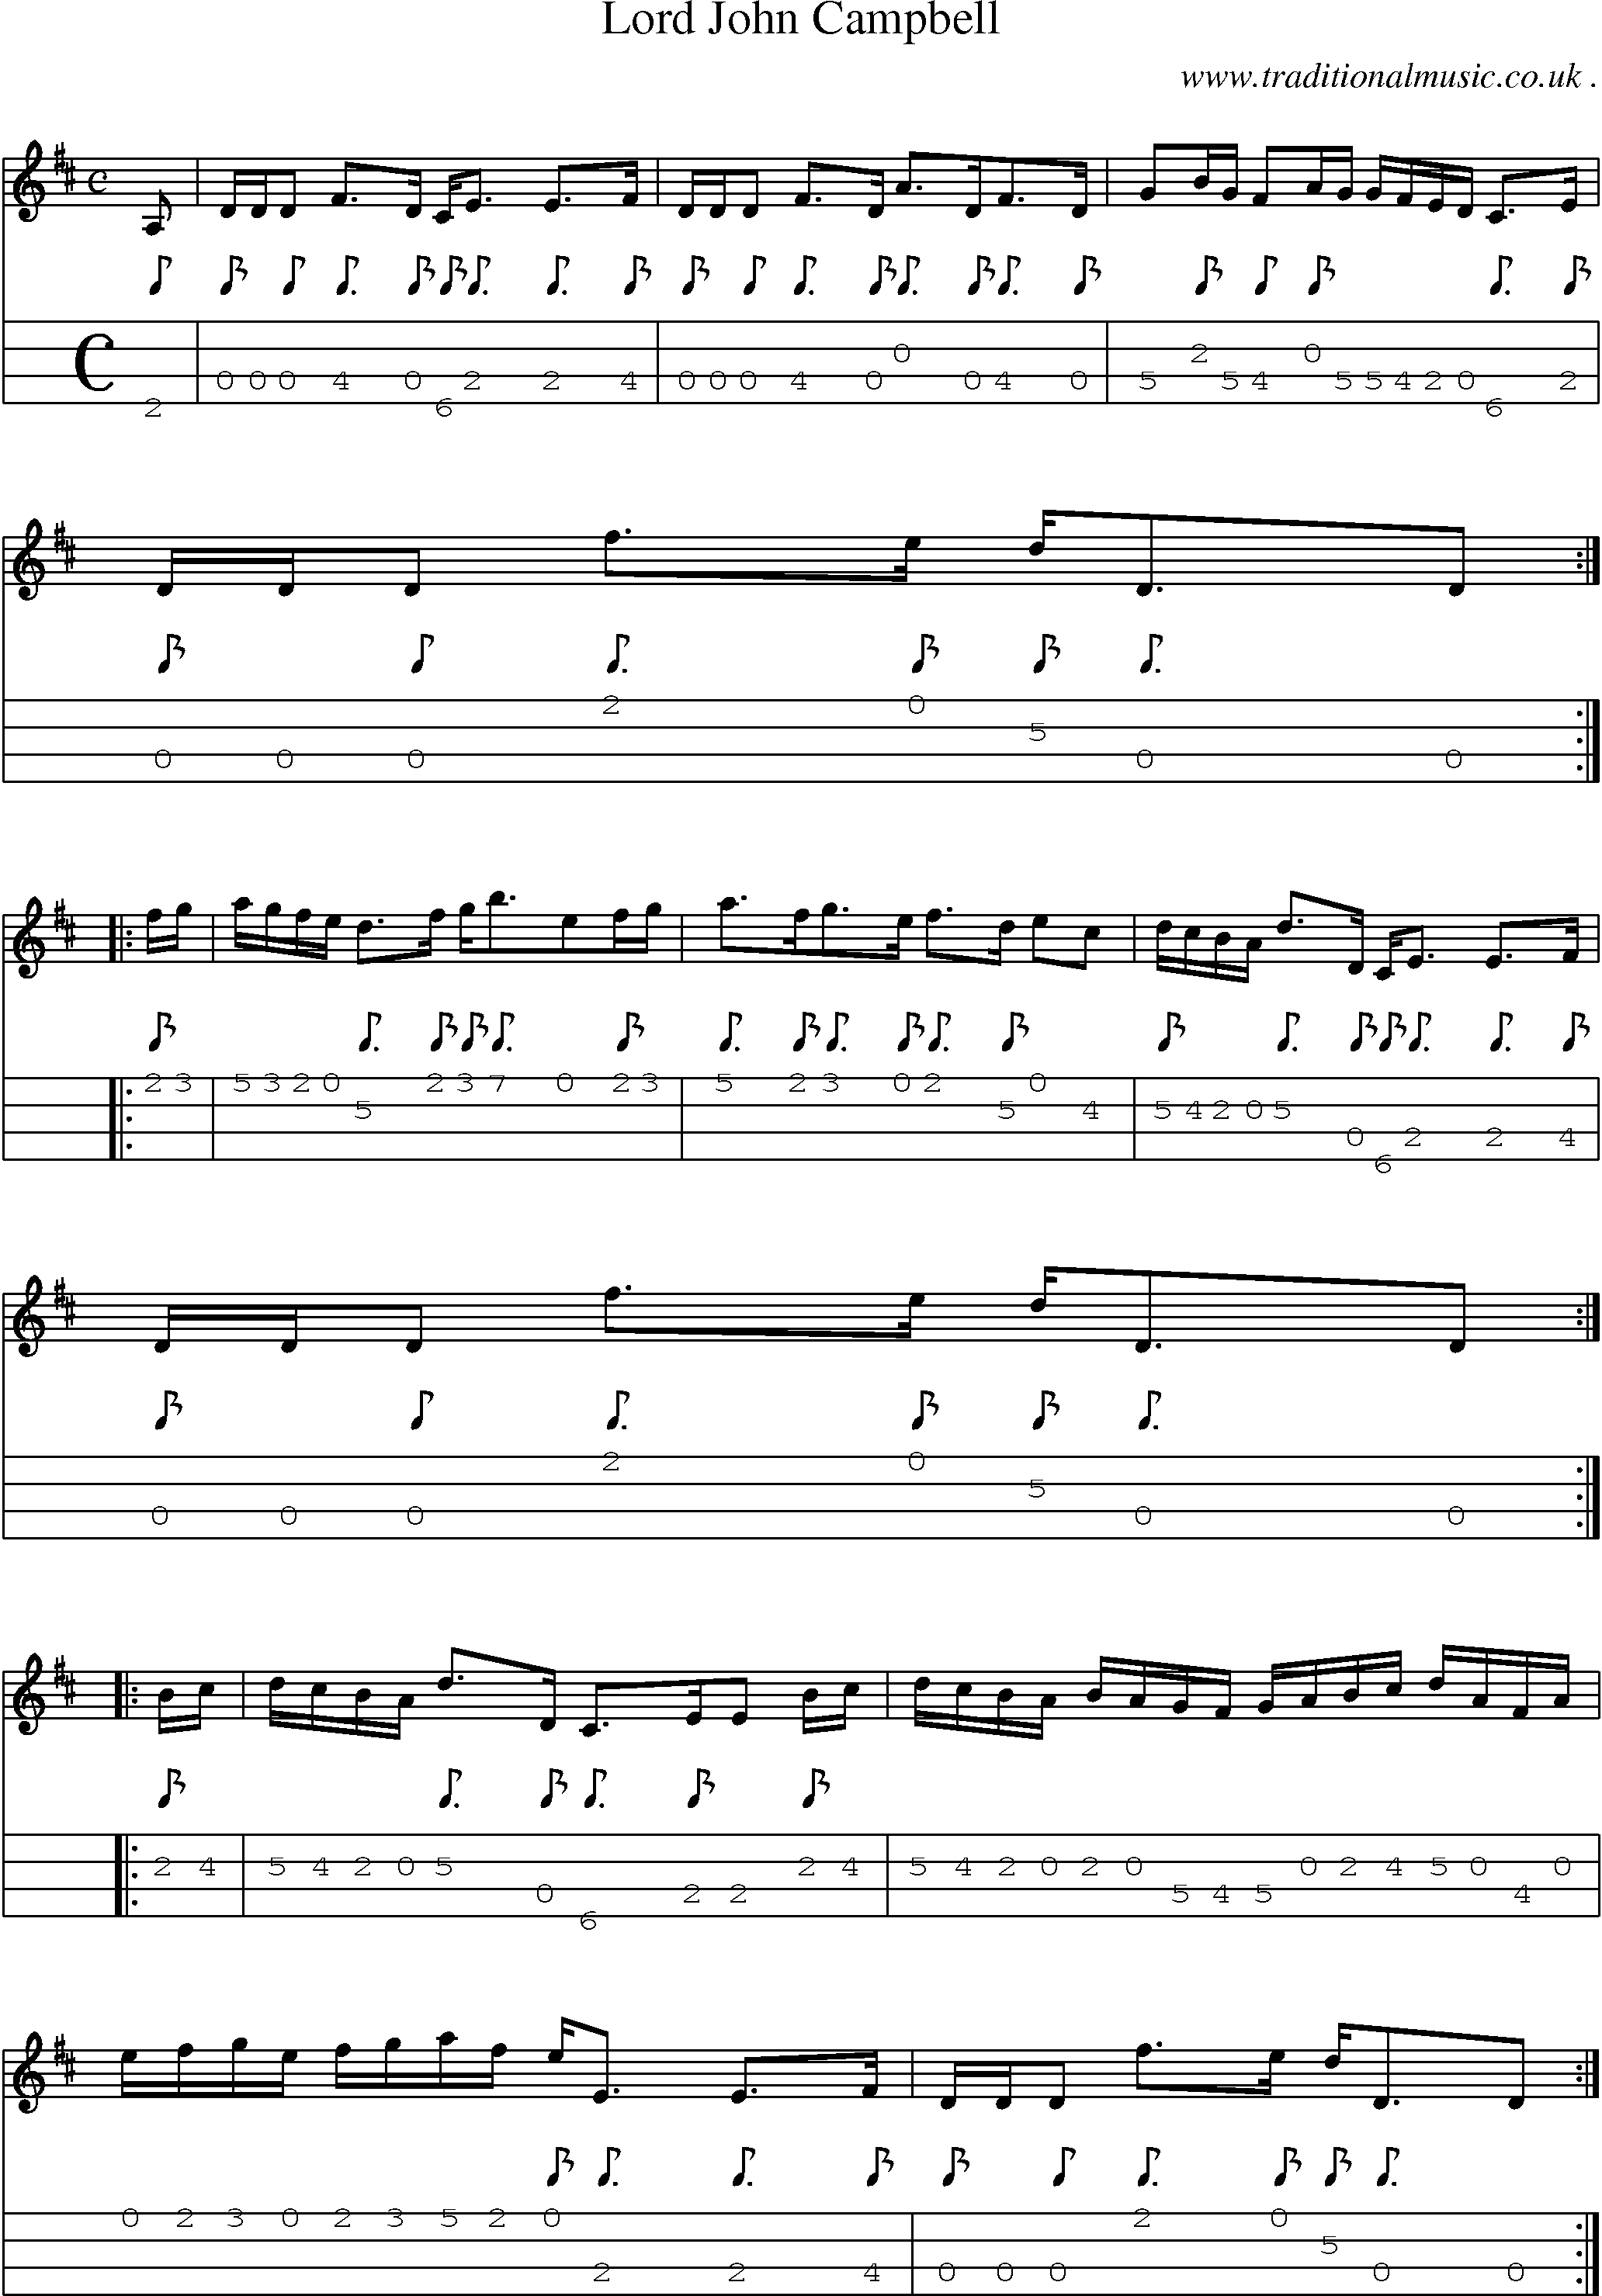 Sheet-music  score, Chords and Mandolin Tabs for Lord John Campbell